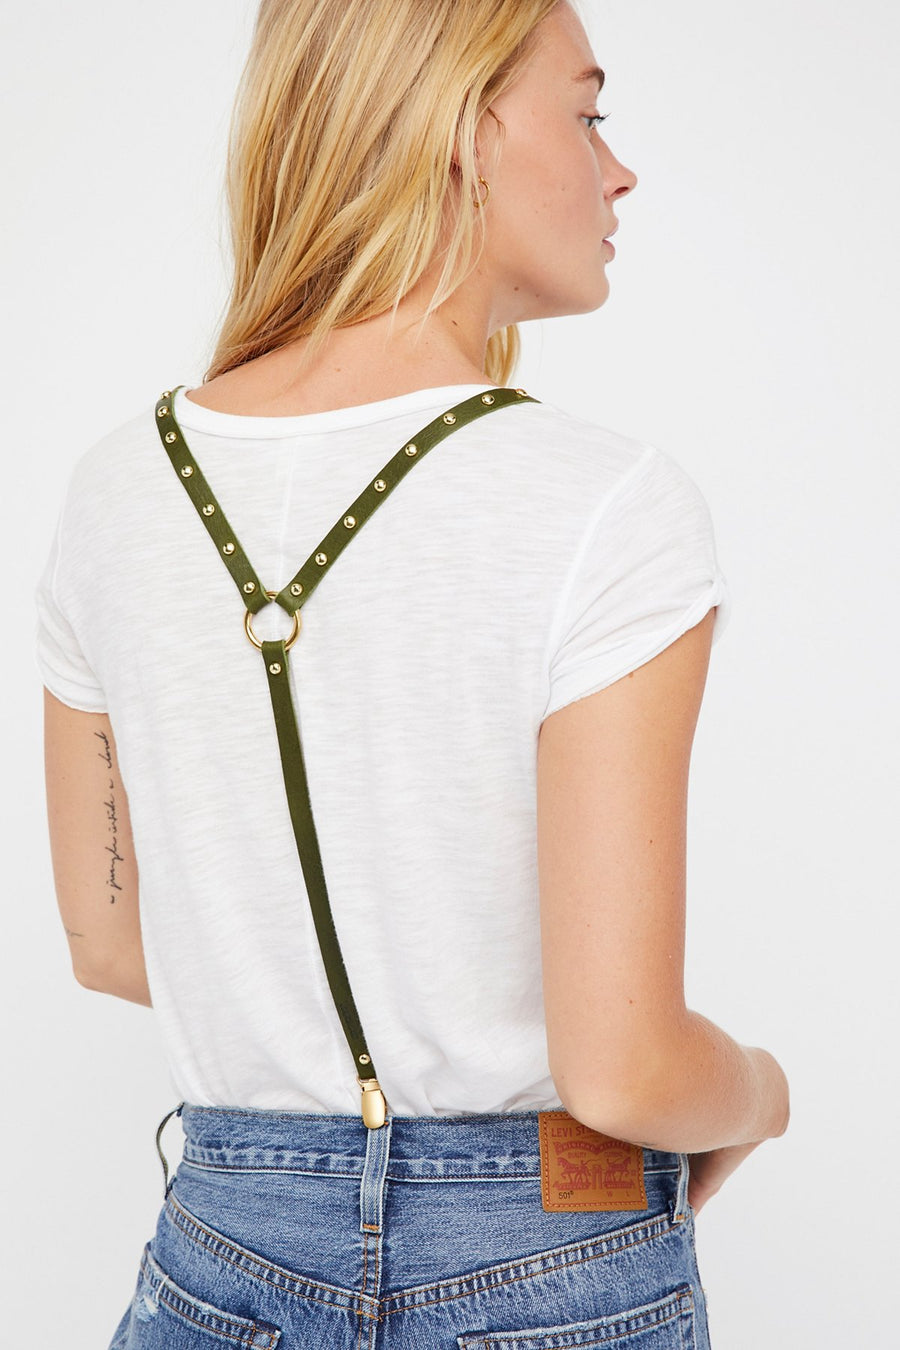 LUX Studded Leather Suspenders